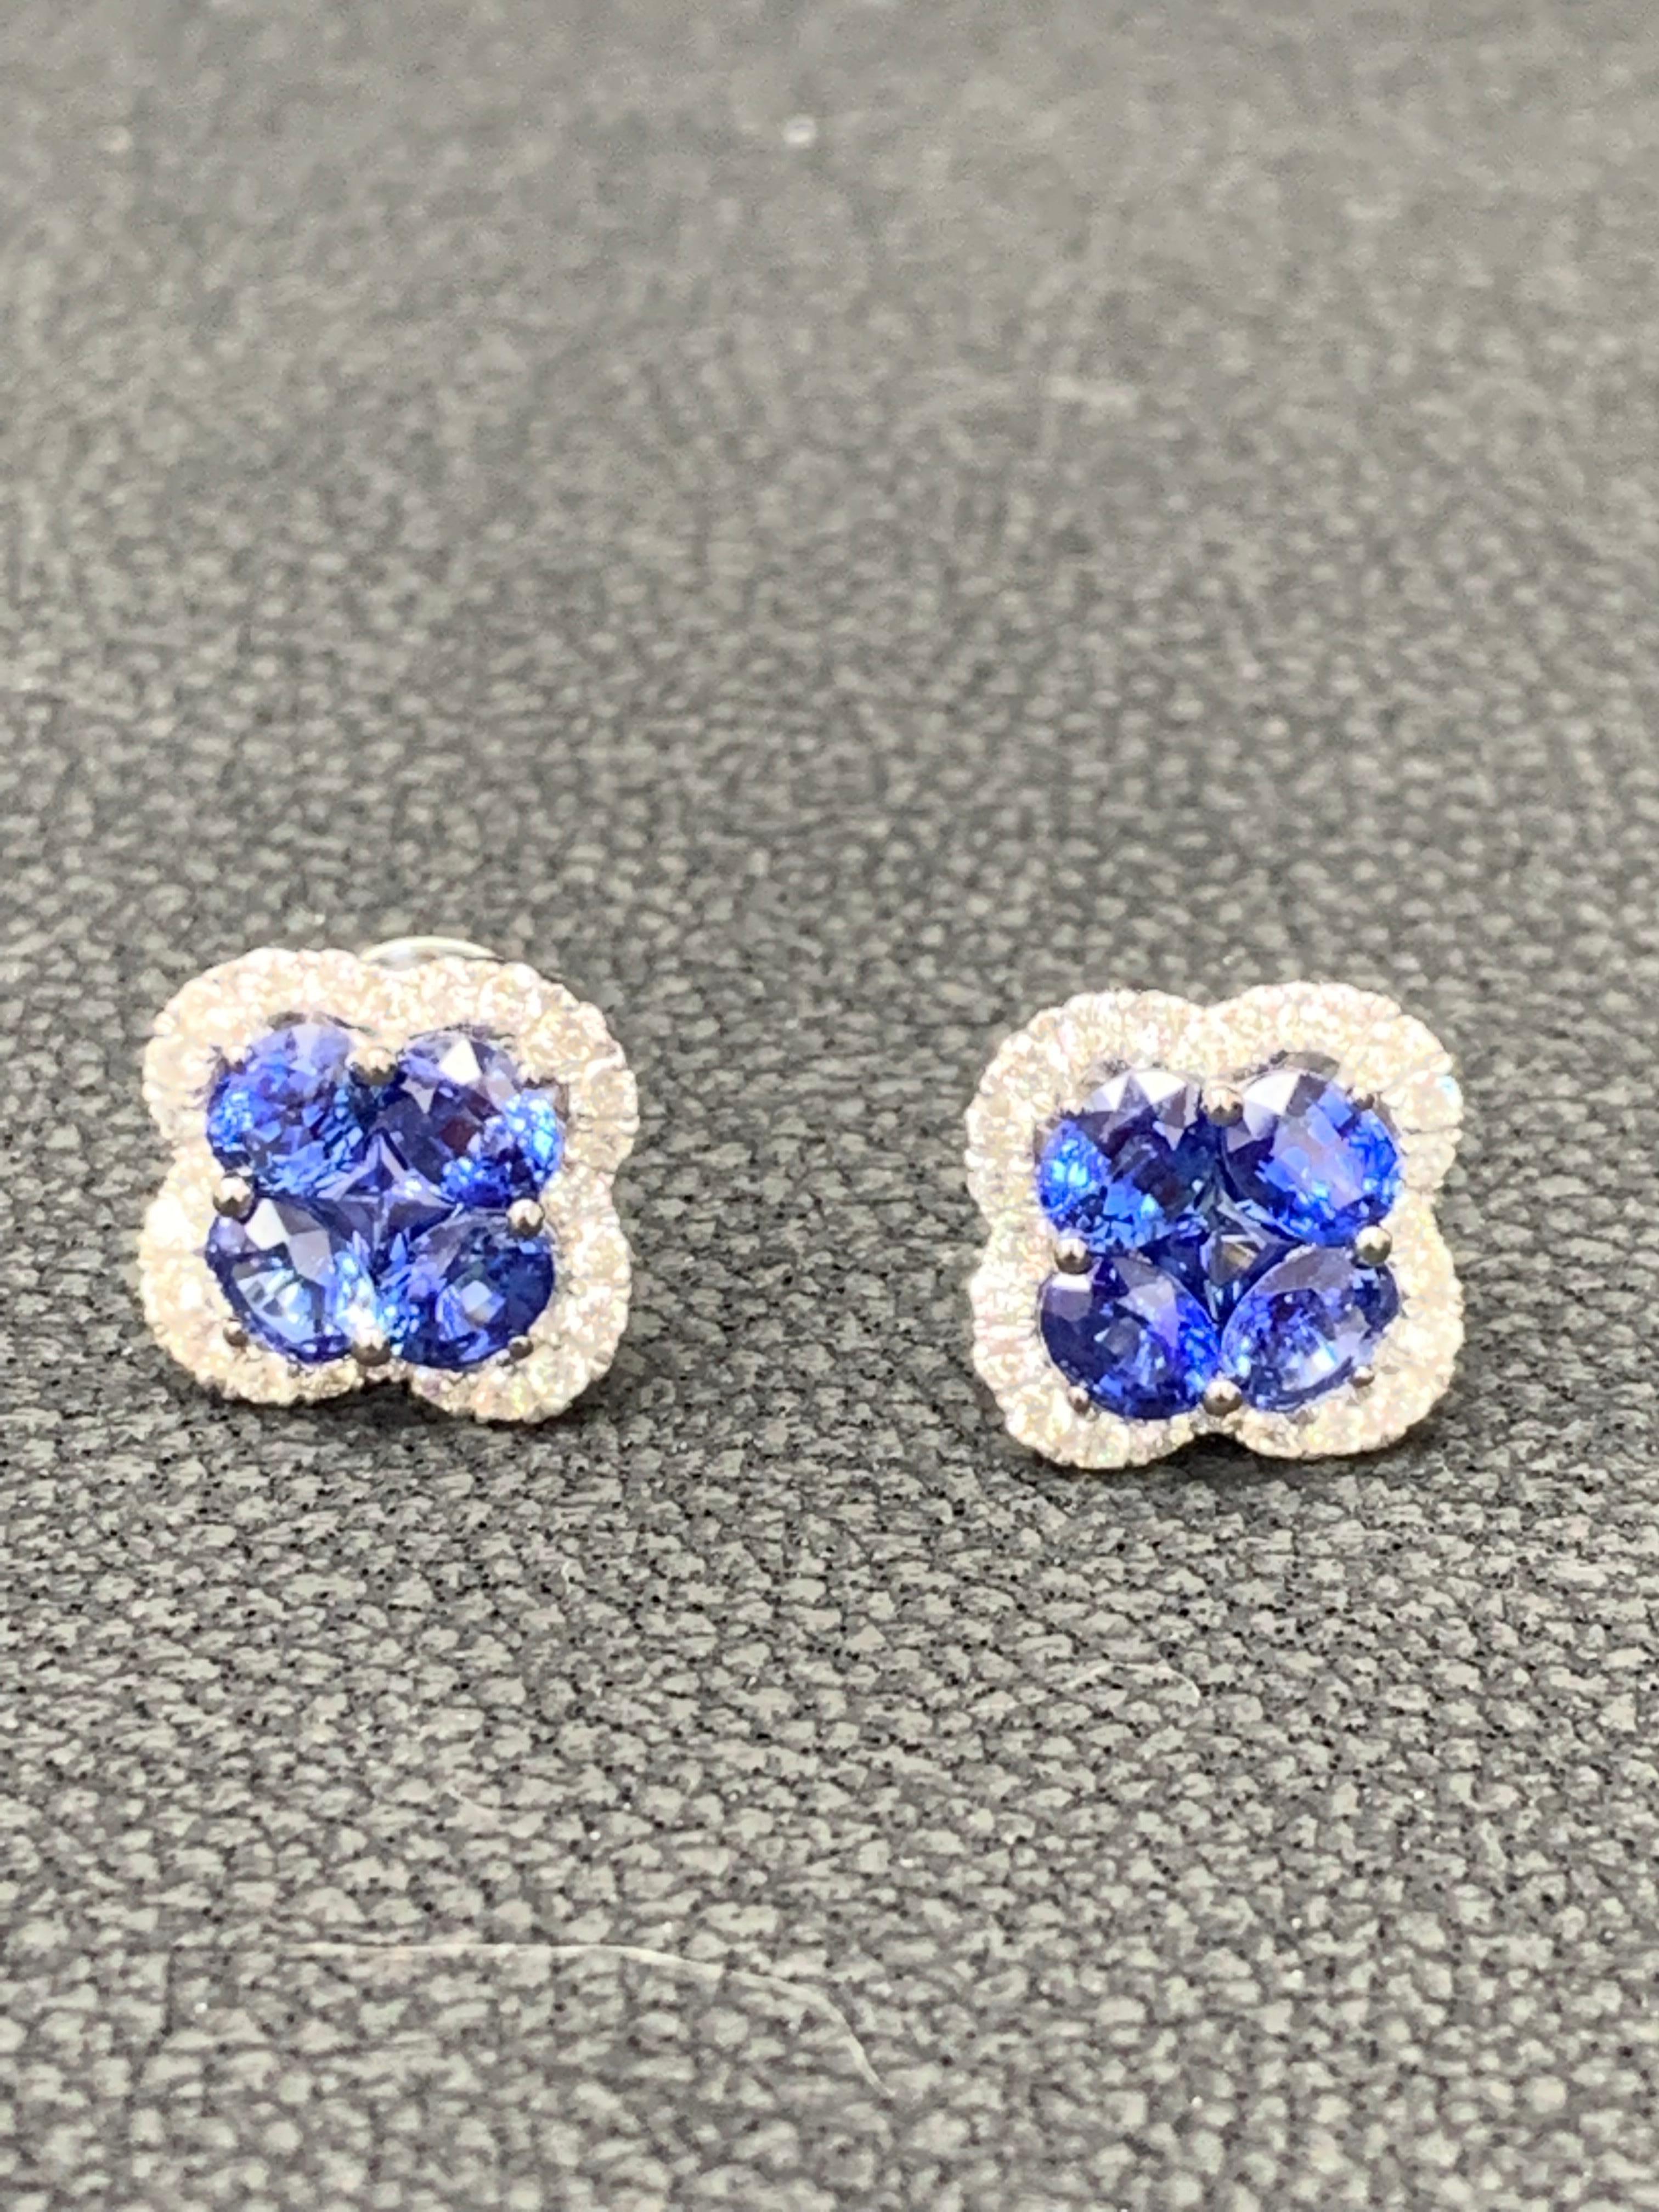 Showcasing flower design stud earrings with 8 oval shape Blue Sapphires weighing 1.85 carats total and 2 round shape Blue Sapphires weighing 0.17 carat, accented by a row of round brilliant diamonds. Diamonds weigh 0.40 carats total. Set in a